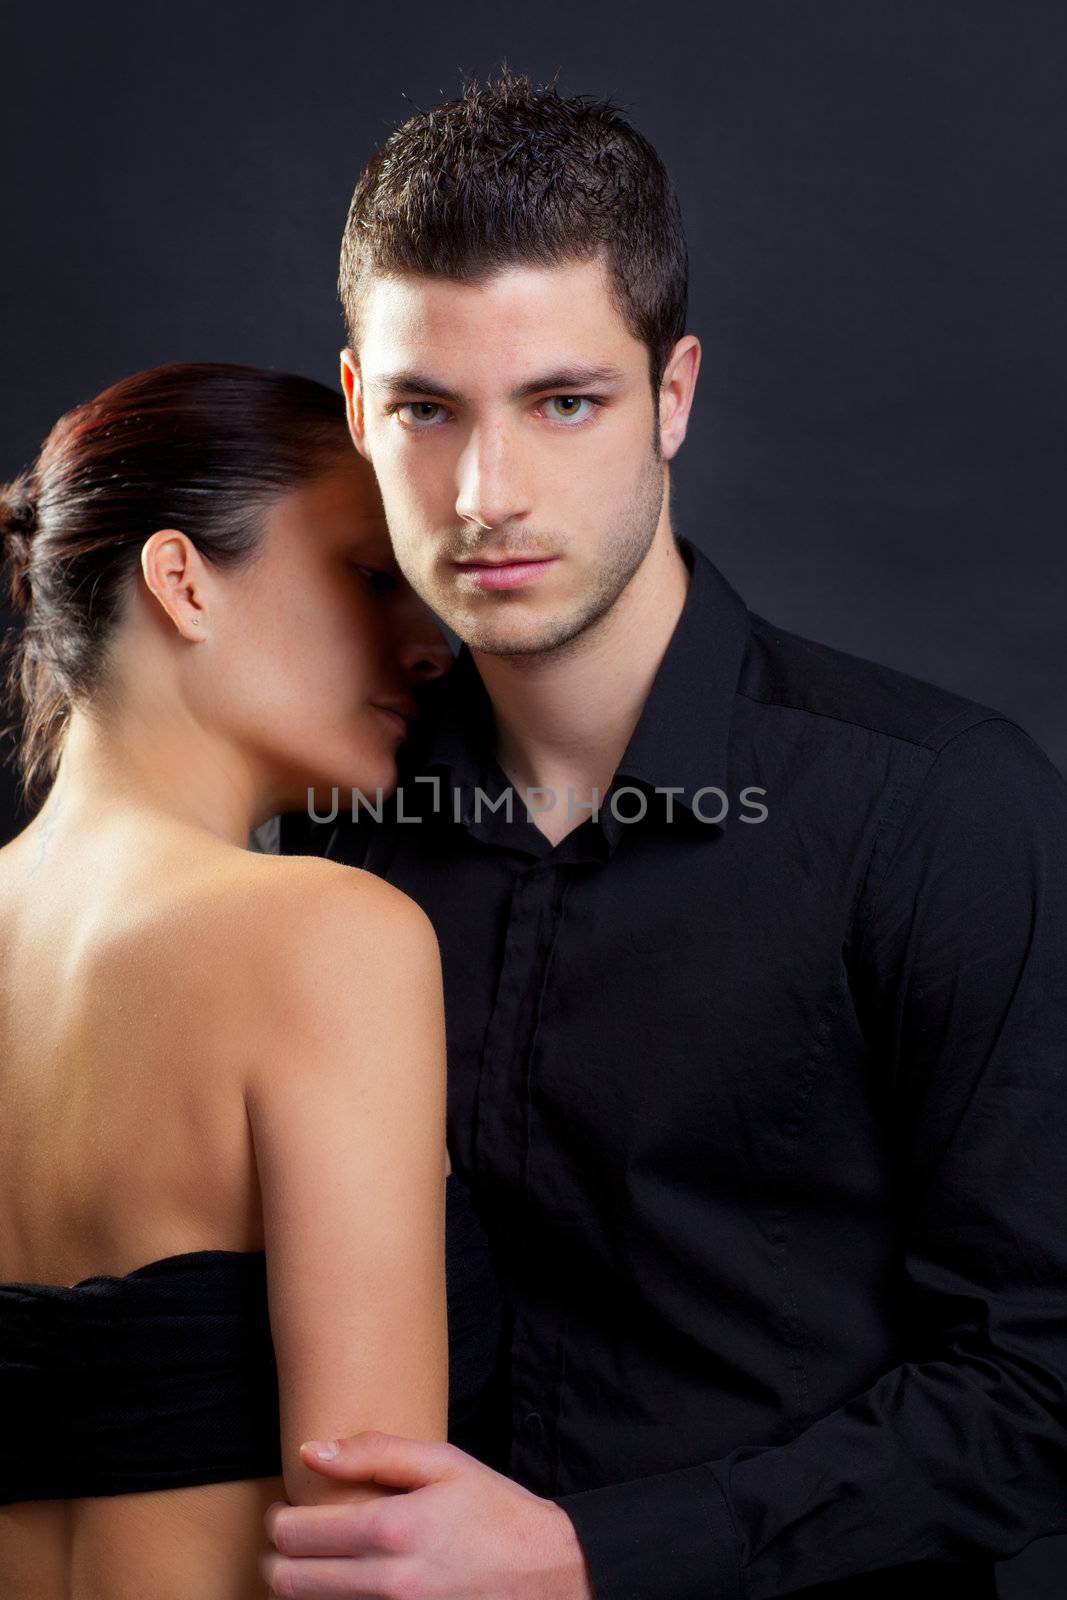 Couple in love with handsome man and rear profile woman nude back